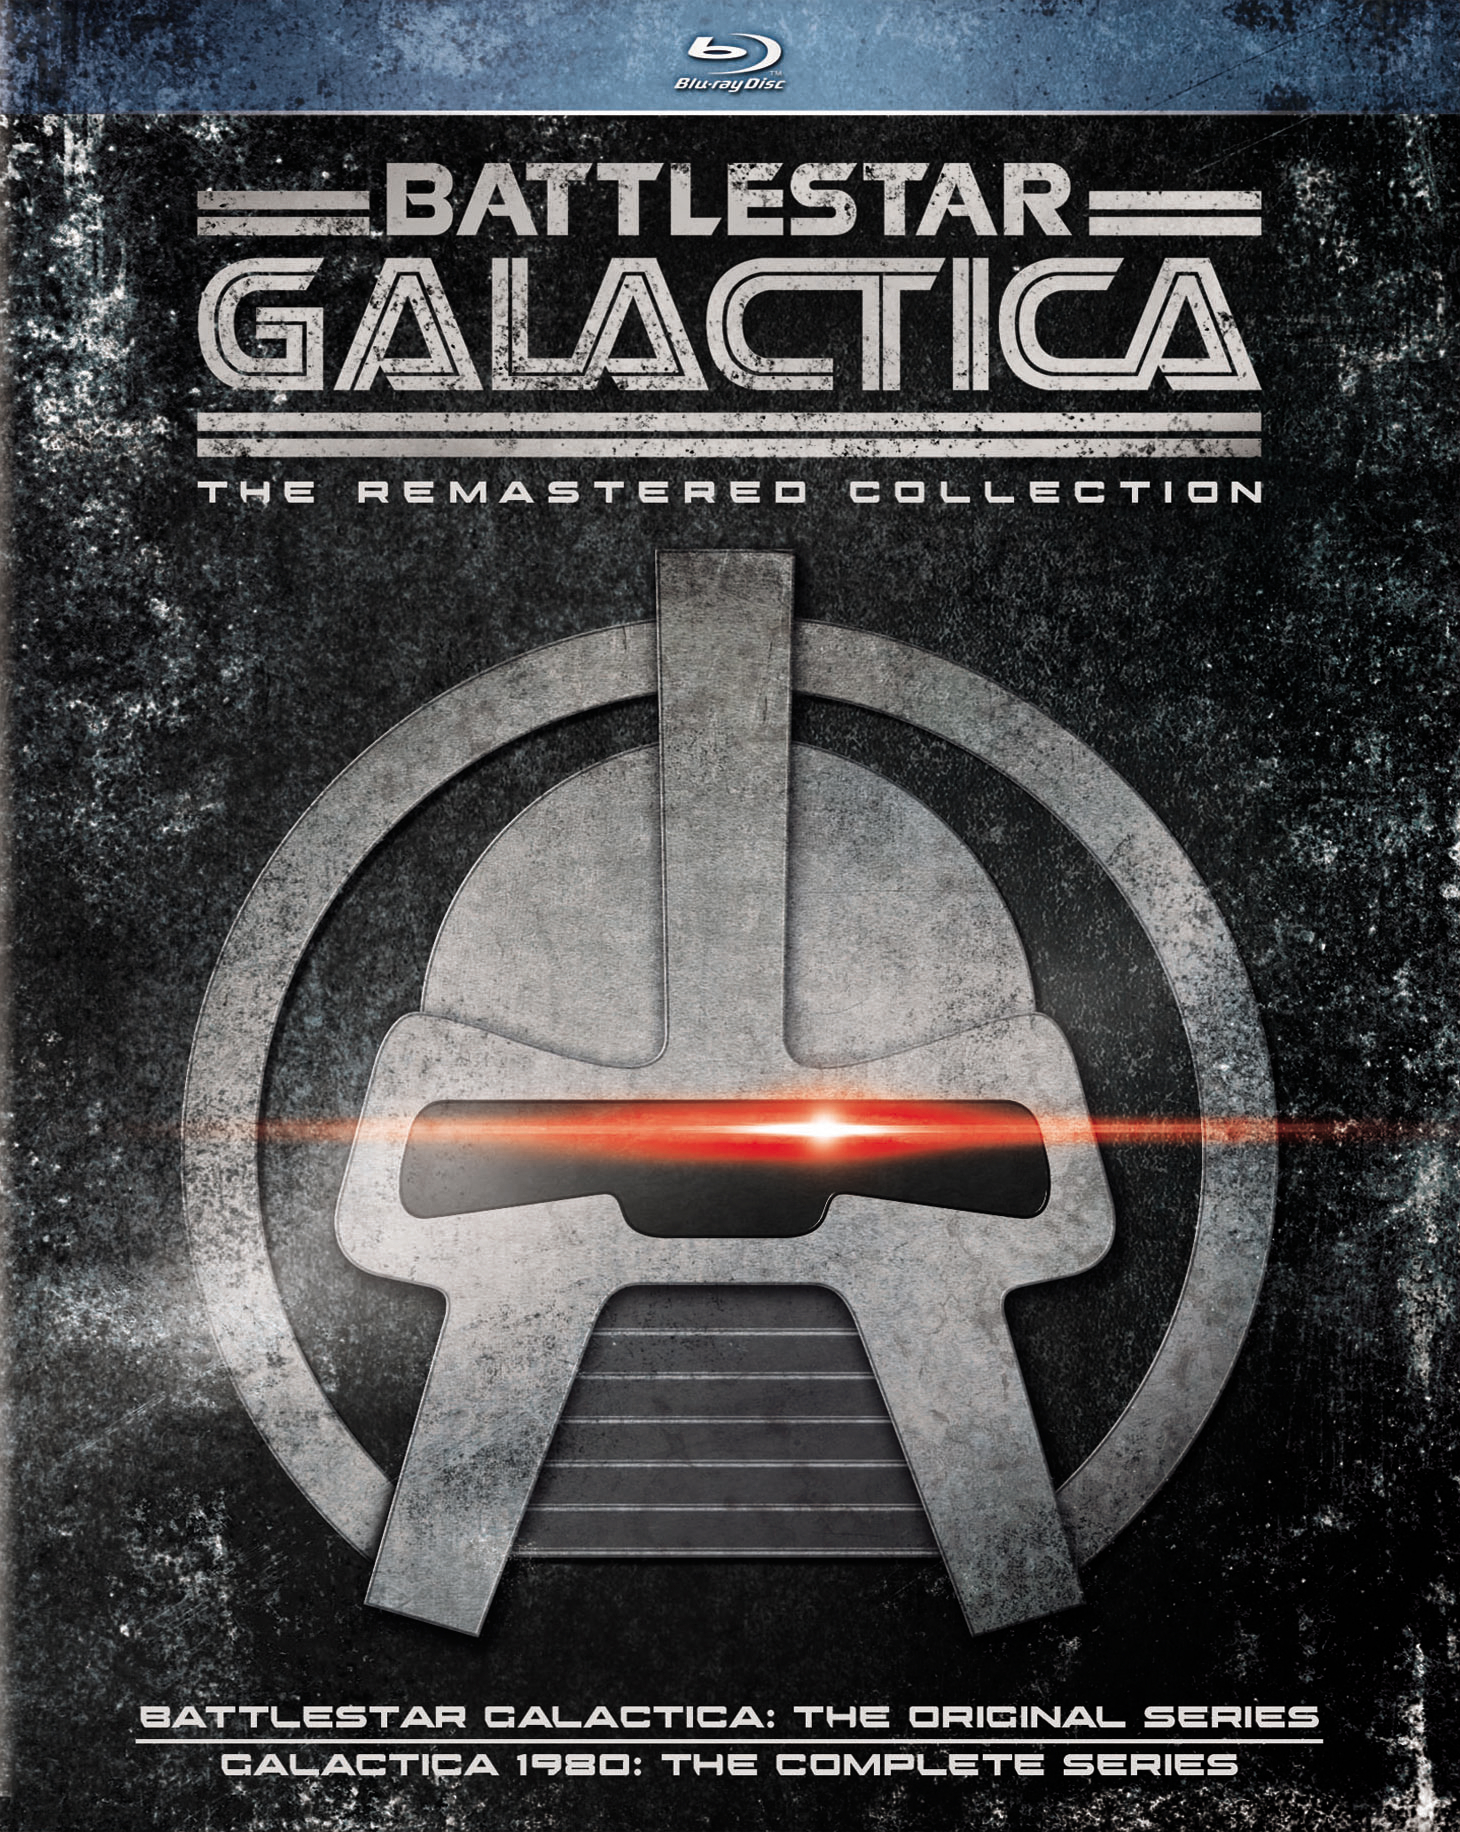 Battlestar Galactica: The Remastered Collection (Blu-ray Remastered) - Blu-ray   - Sci Fi Television On Blu-ray - TV Shows On GRUV